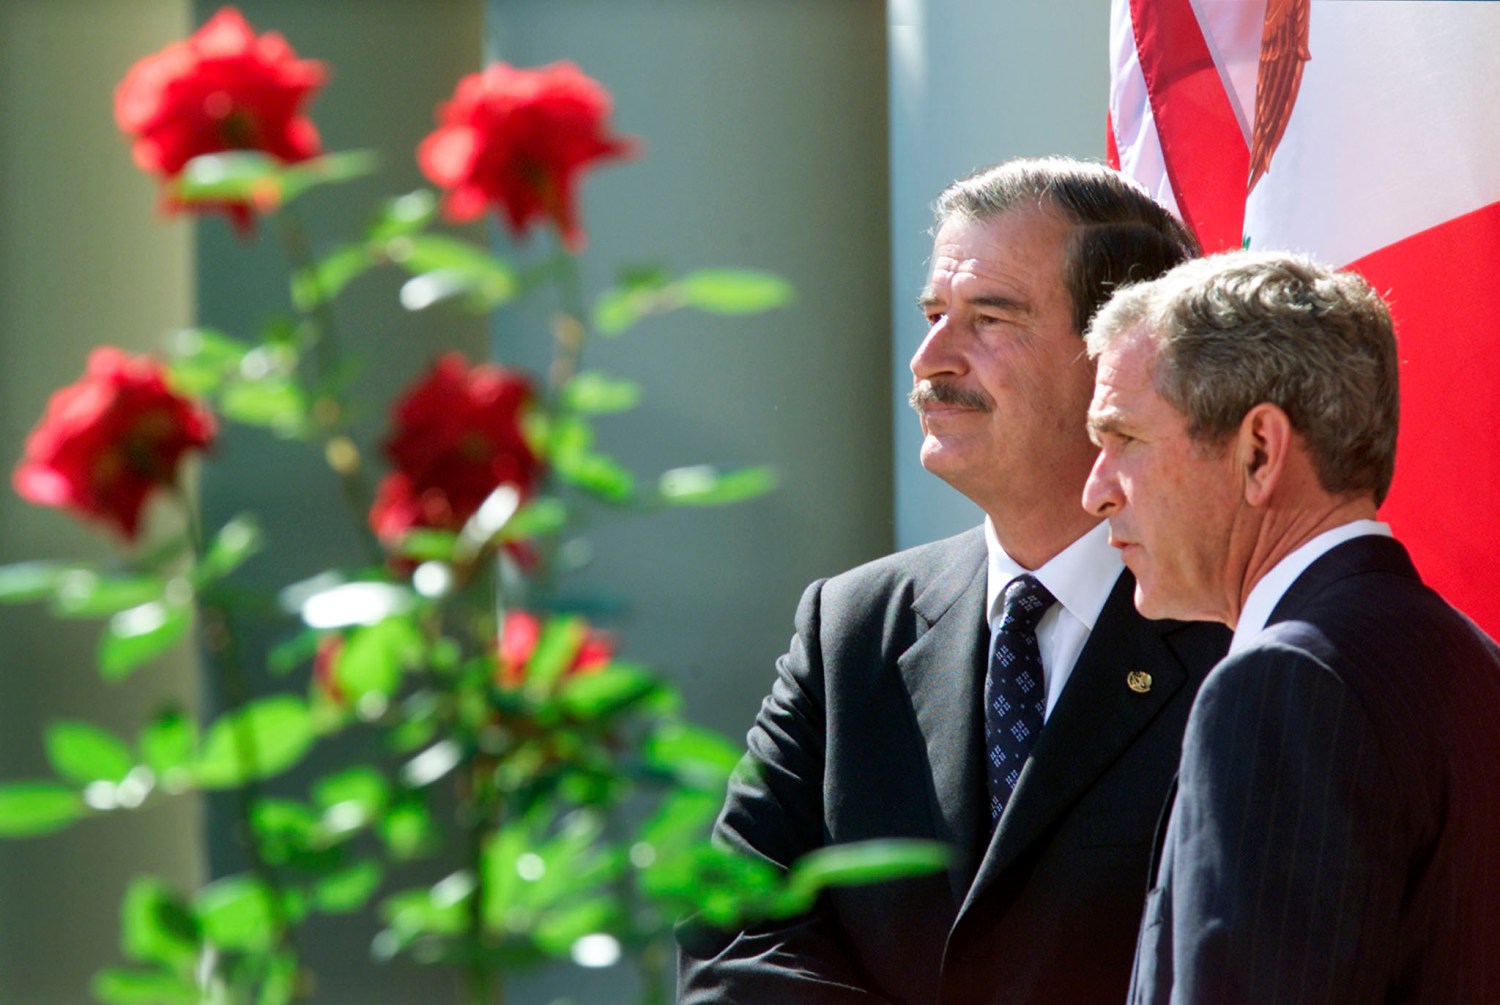 U.S. President George W. Bush (R) stands with Mexican President VicenteFox as they address the media in the Rose Garden at the White House,October 4, 2001. Fox came to the White House to show support for theUnited States response to the attacks in New York and Washington.REUTERS/Gary HershornGMH/ME